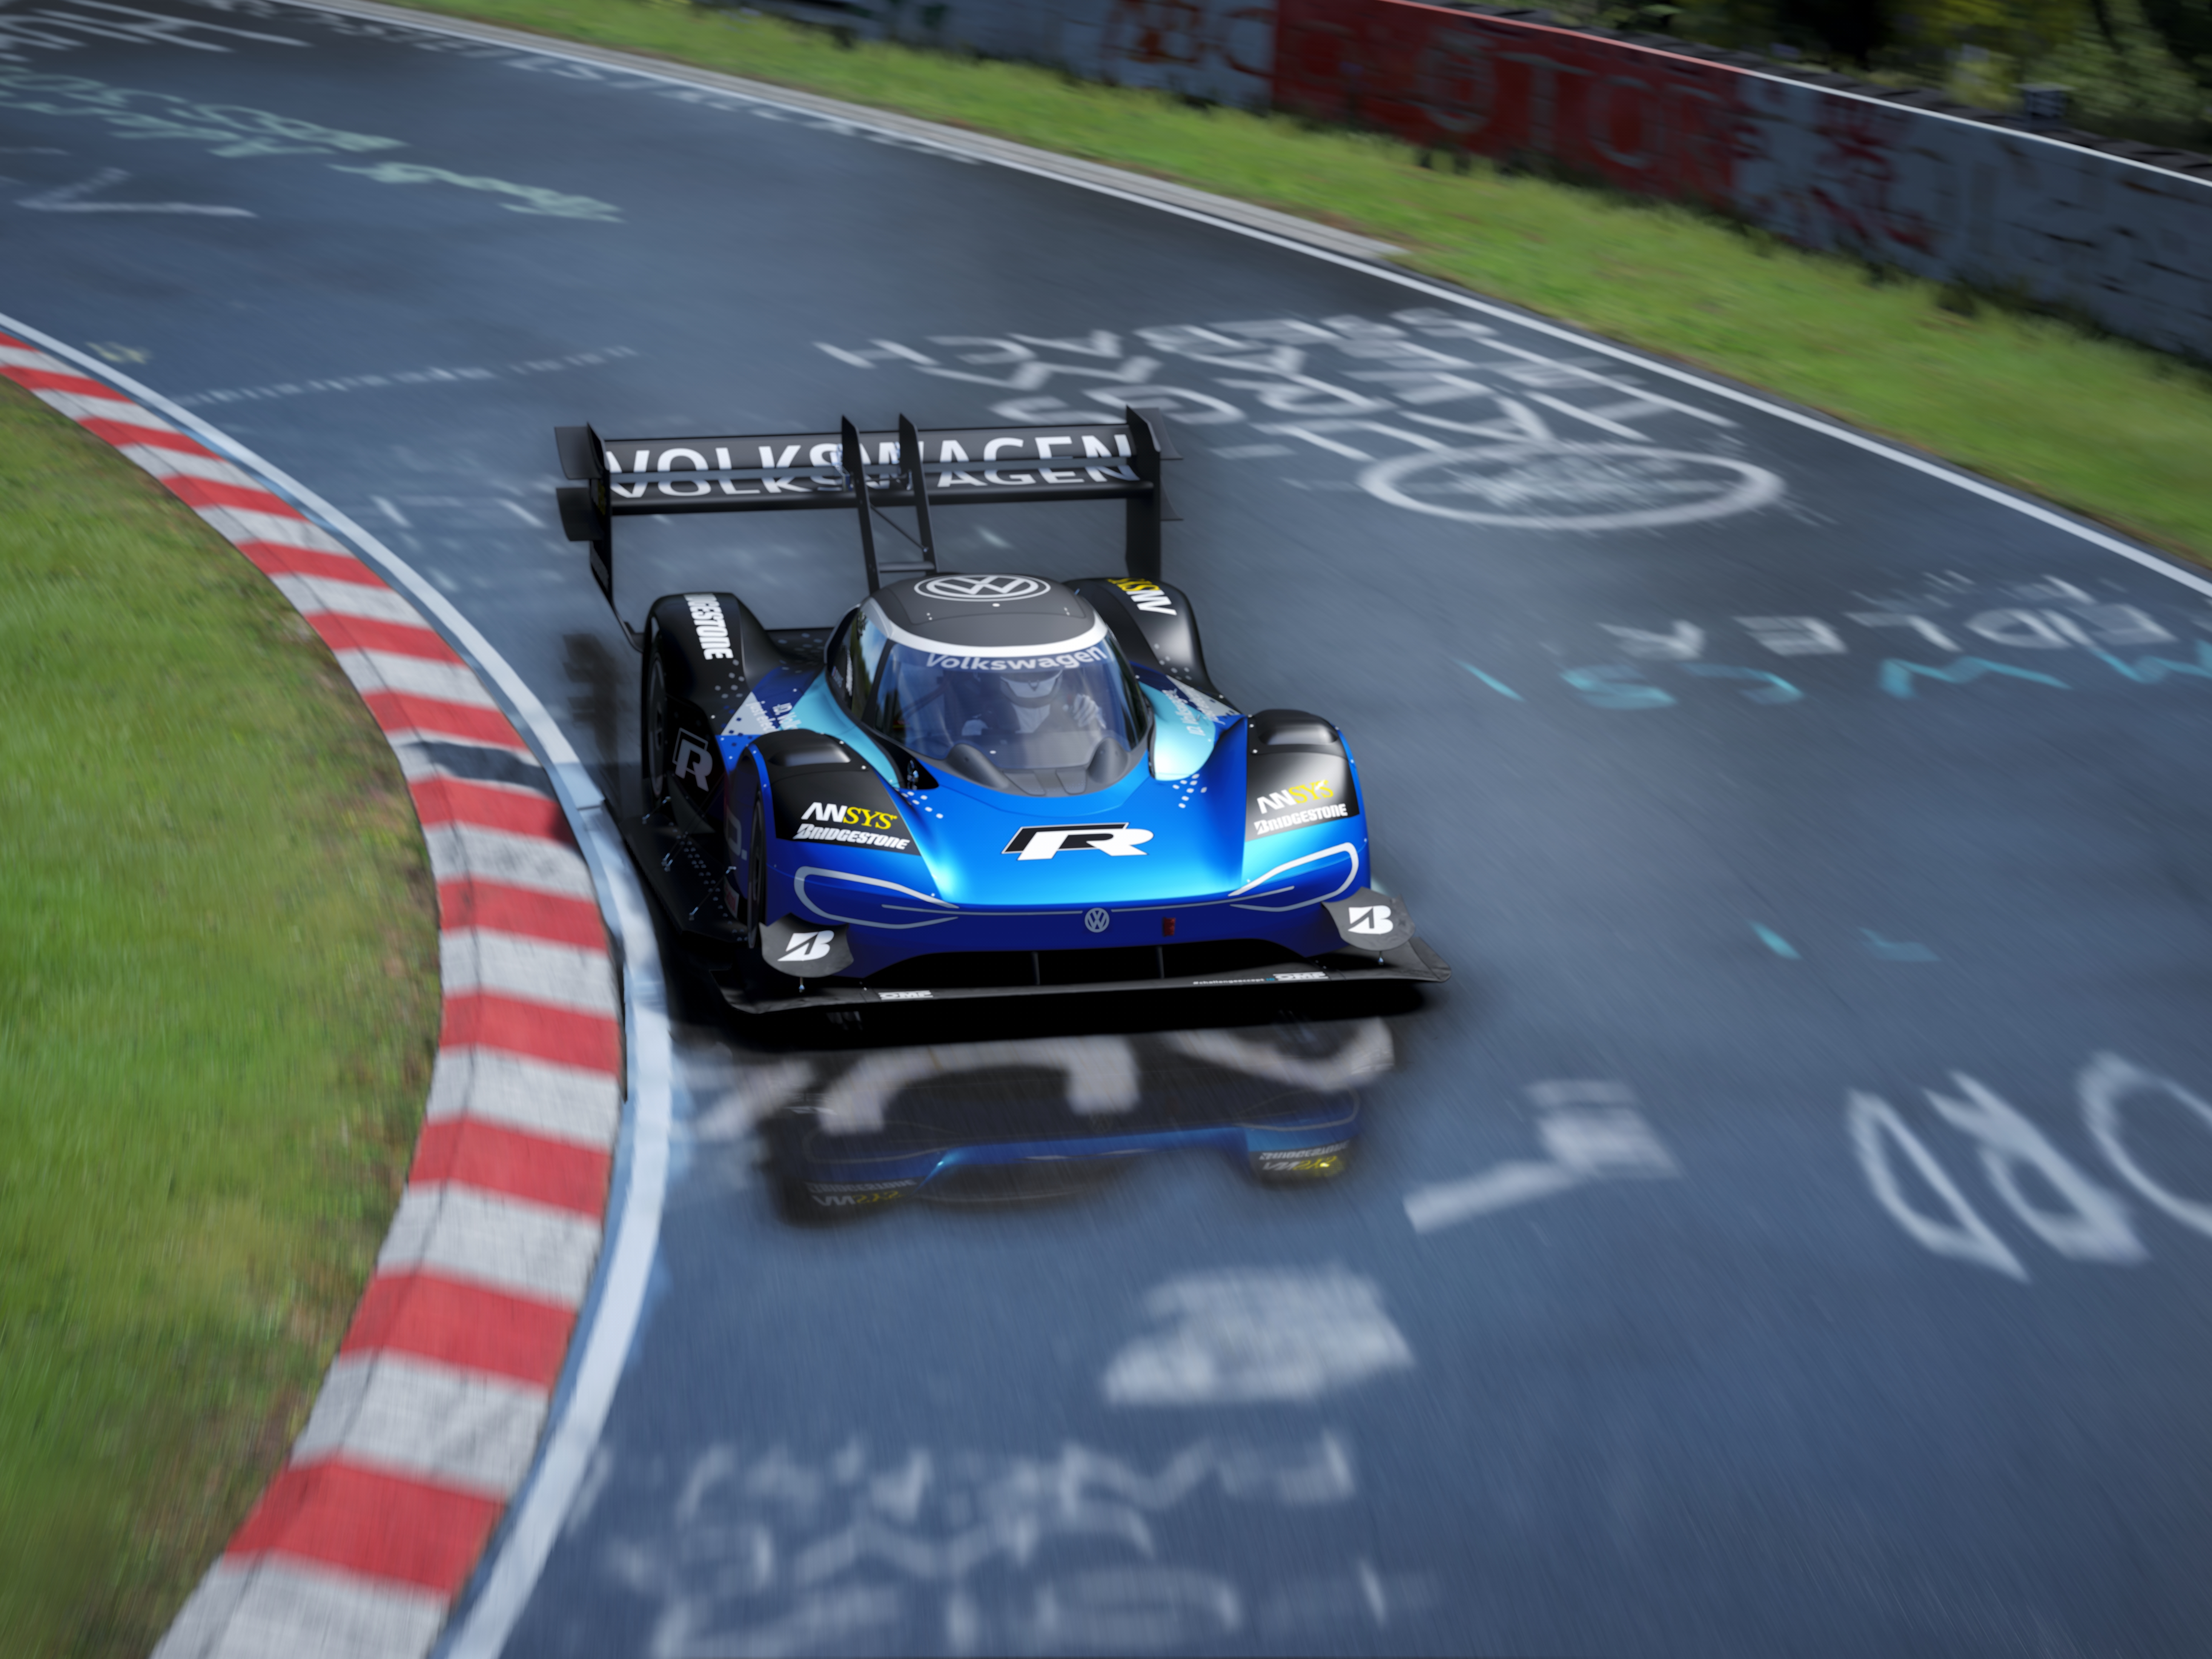 General 5760x4320 Nurburgring Volkswagen Volkswagen ID-R race cars Assetto Corsa PC gaming wetland frontal view video games reflection race tracks CGI